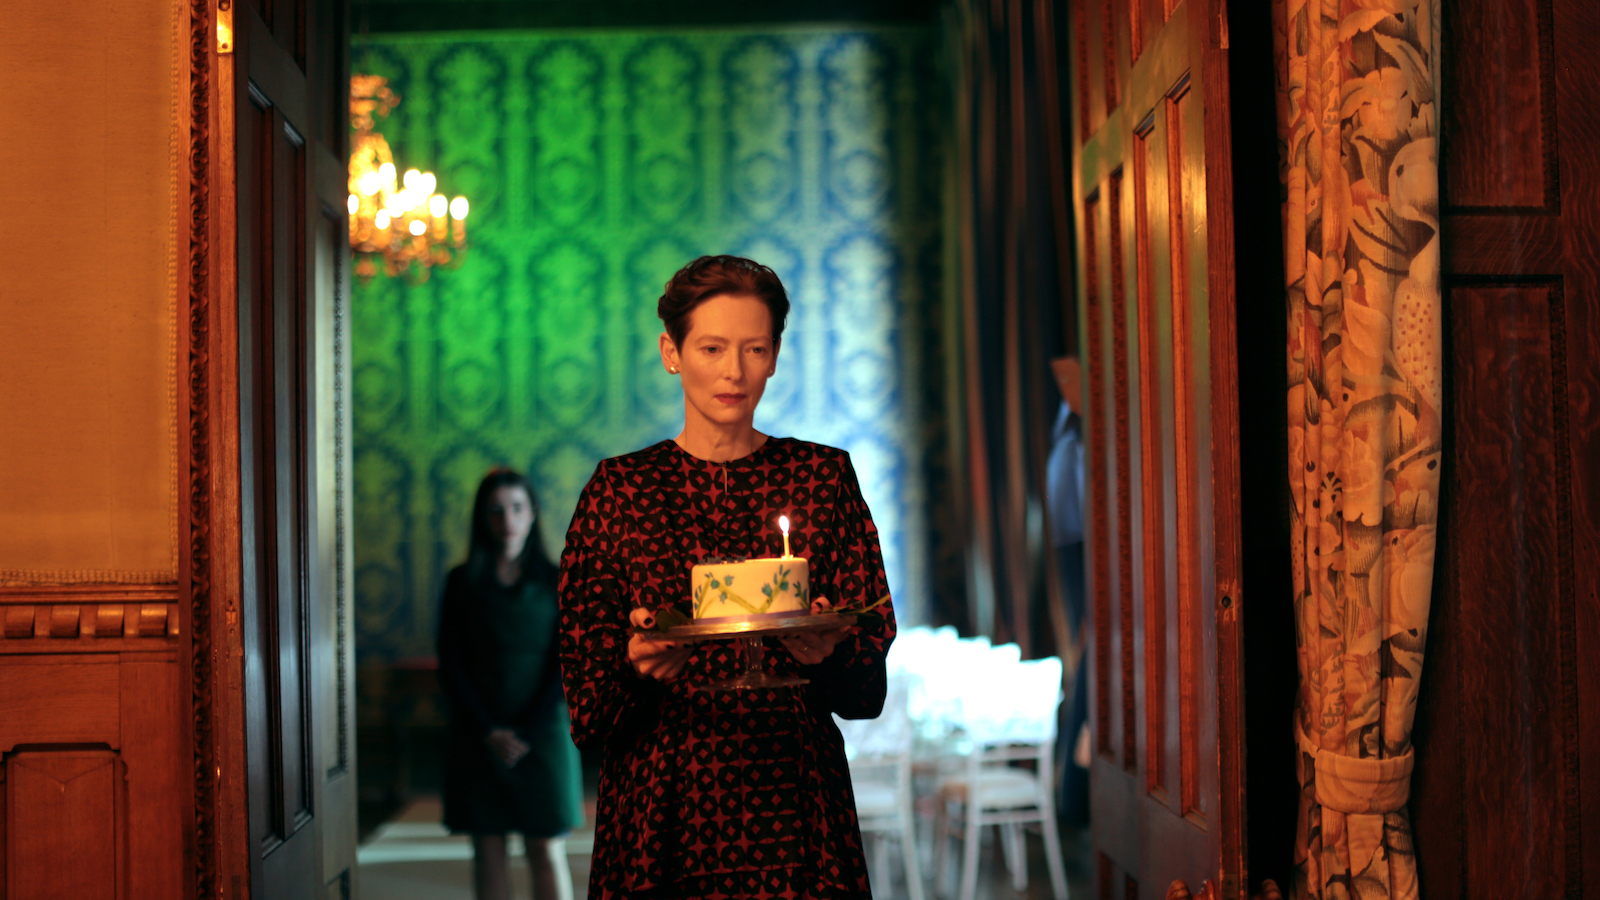 A woman in a hallway holds a birthday cake against a green wallpaper background